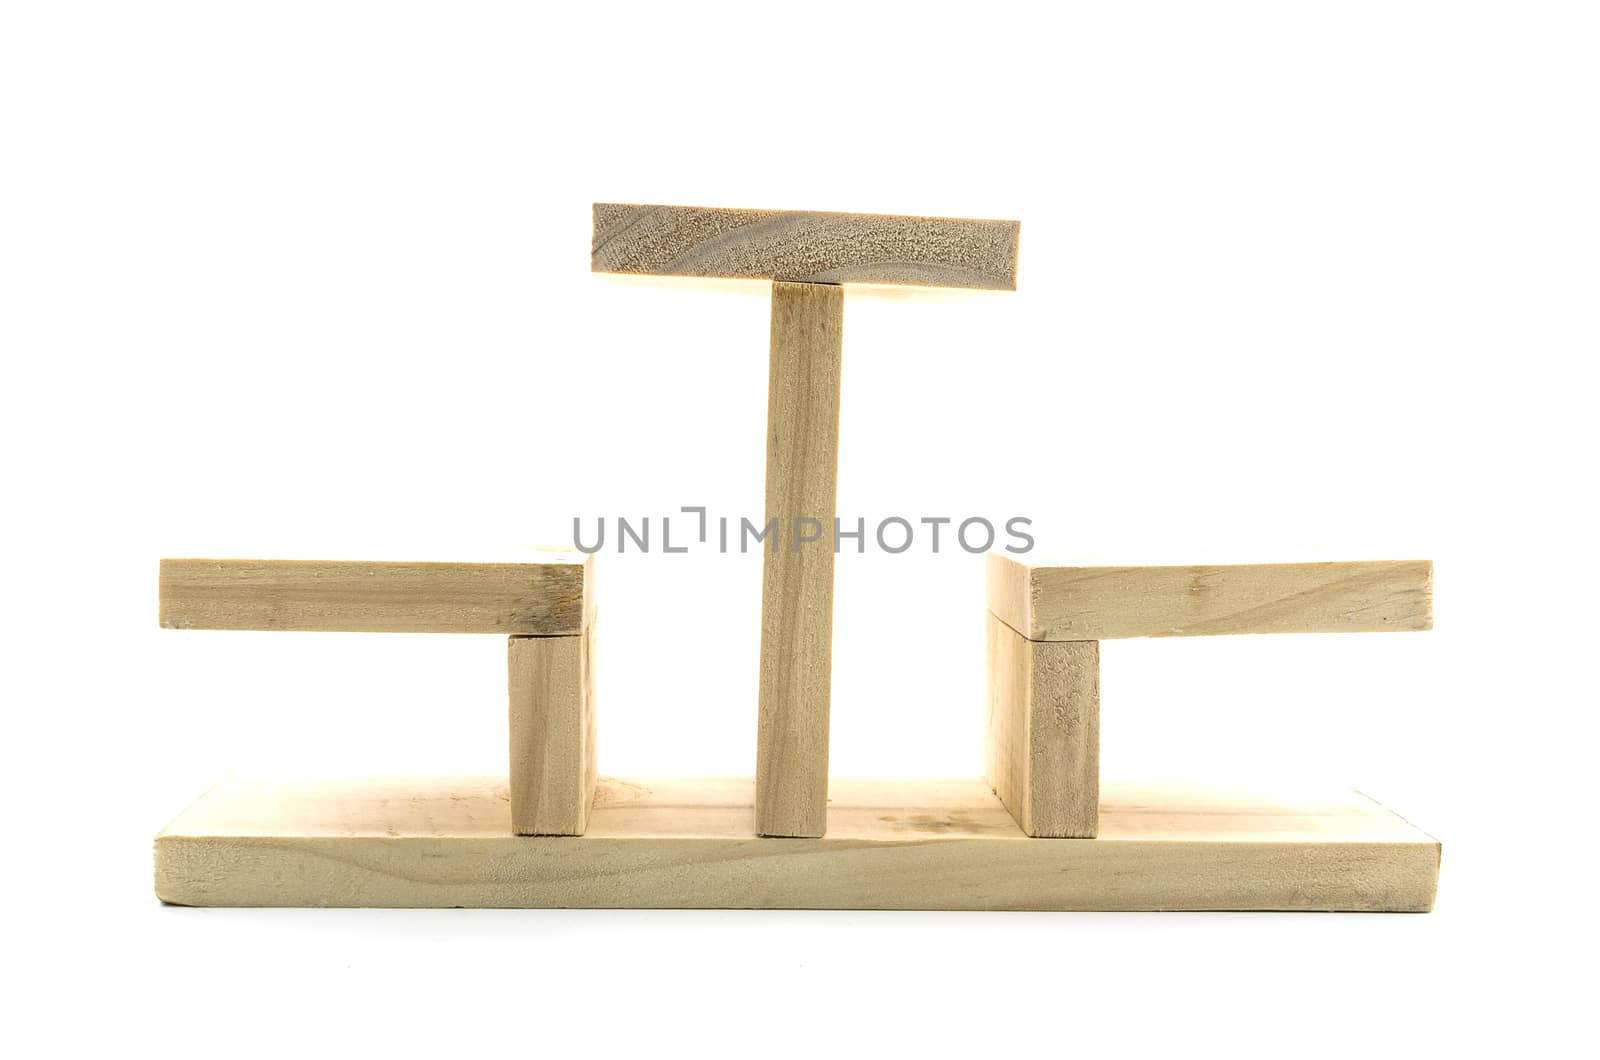 A Wood Rank Accessories Object on the white isolated background.